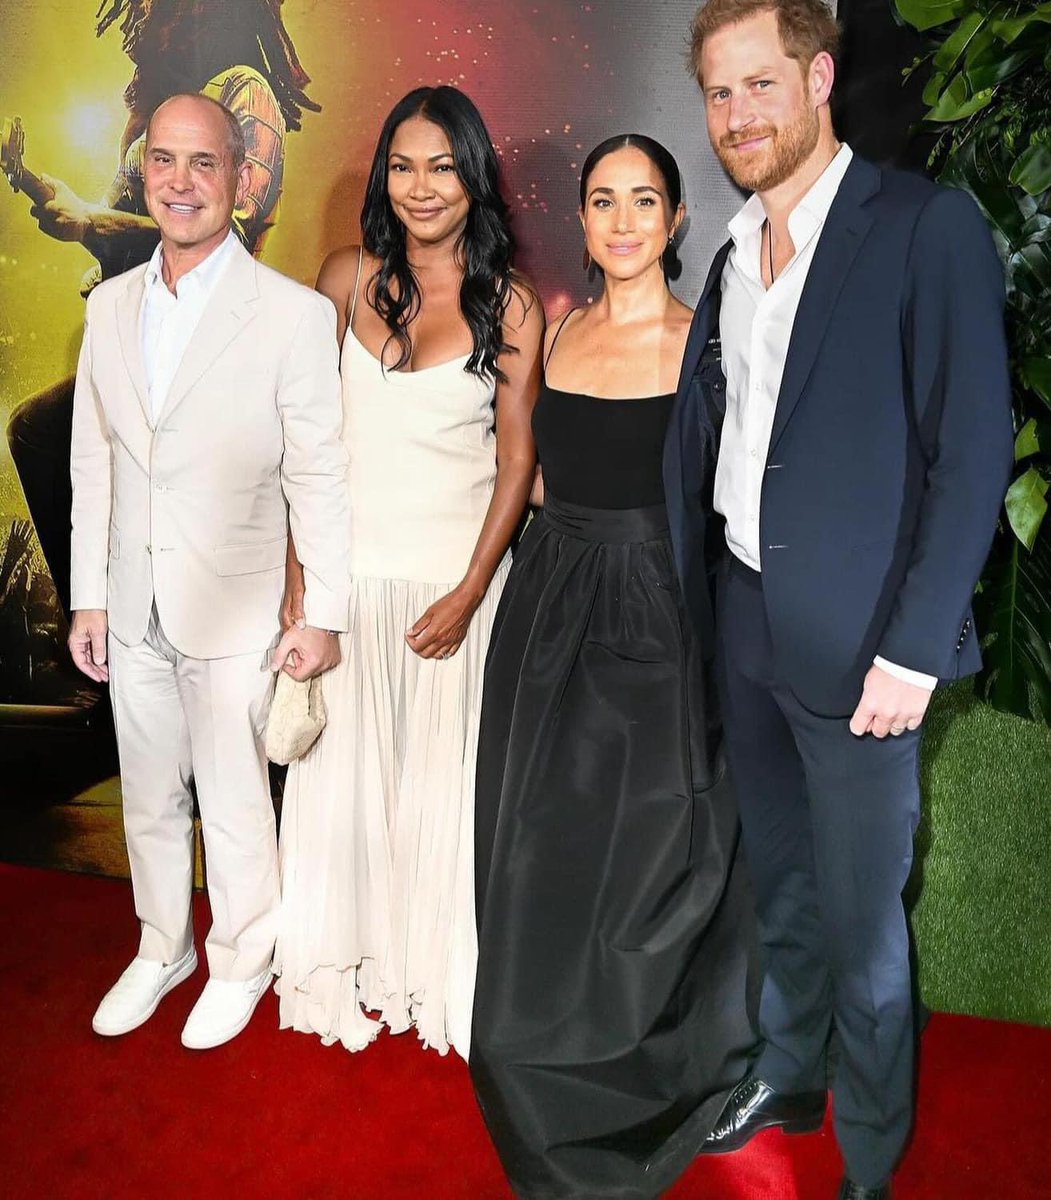 Yesterday many celebrities, political elites and guess what, British royalty went out to the premier of Bob Marley’s ‘One Love’ film in Jamaica. What caught my eye was the presence of a British Prince, Harry Windsor and his wife Meghan. When Zimbabwe became independent in